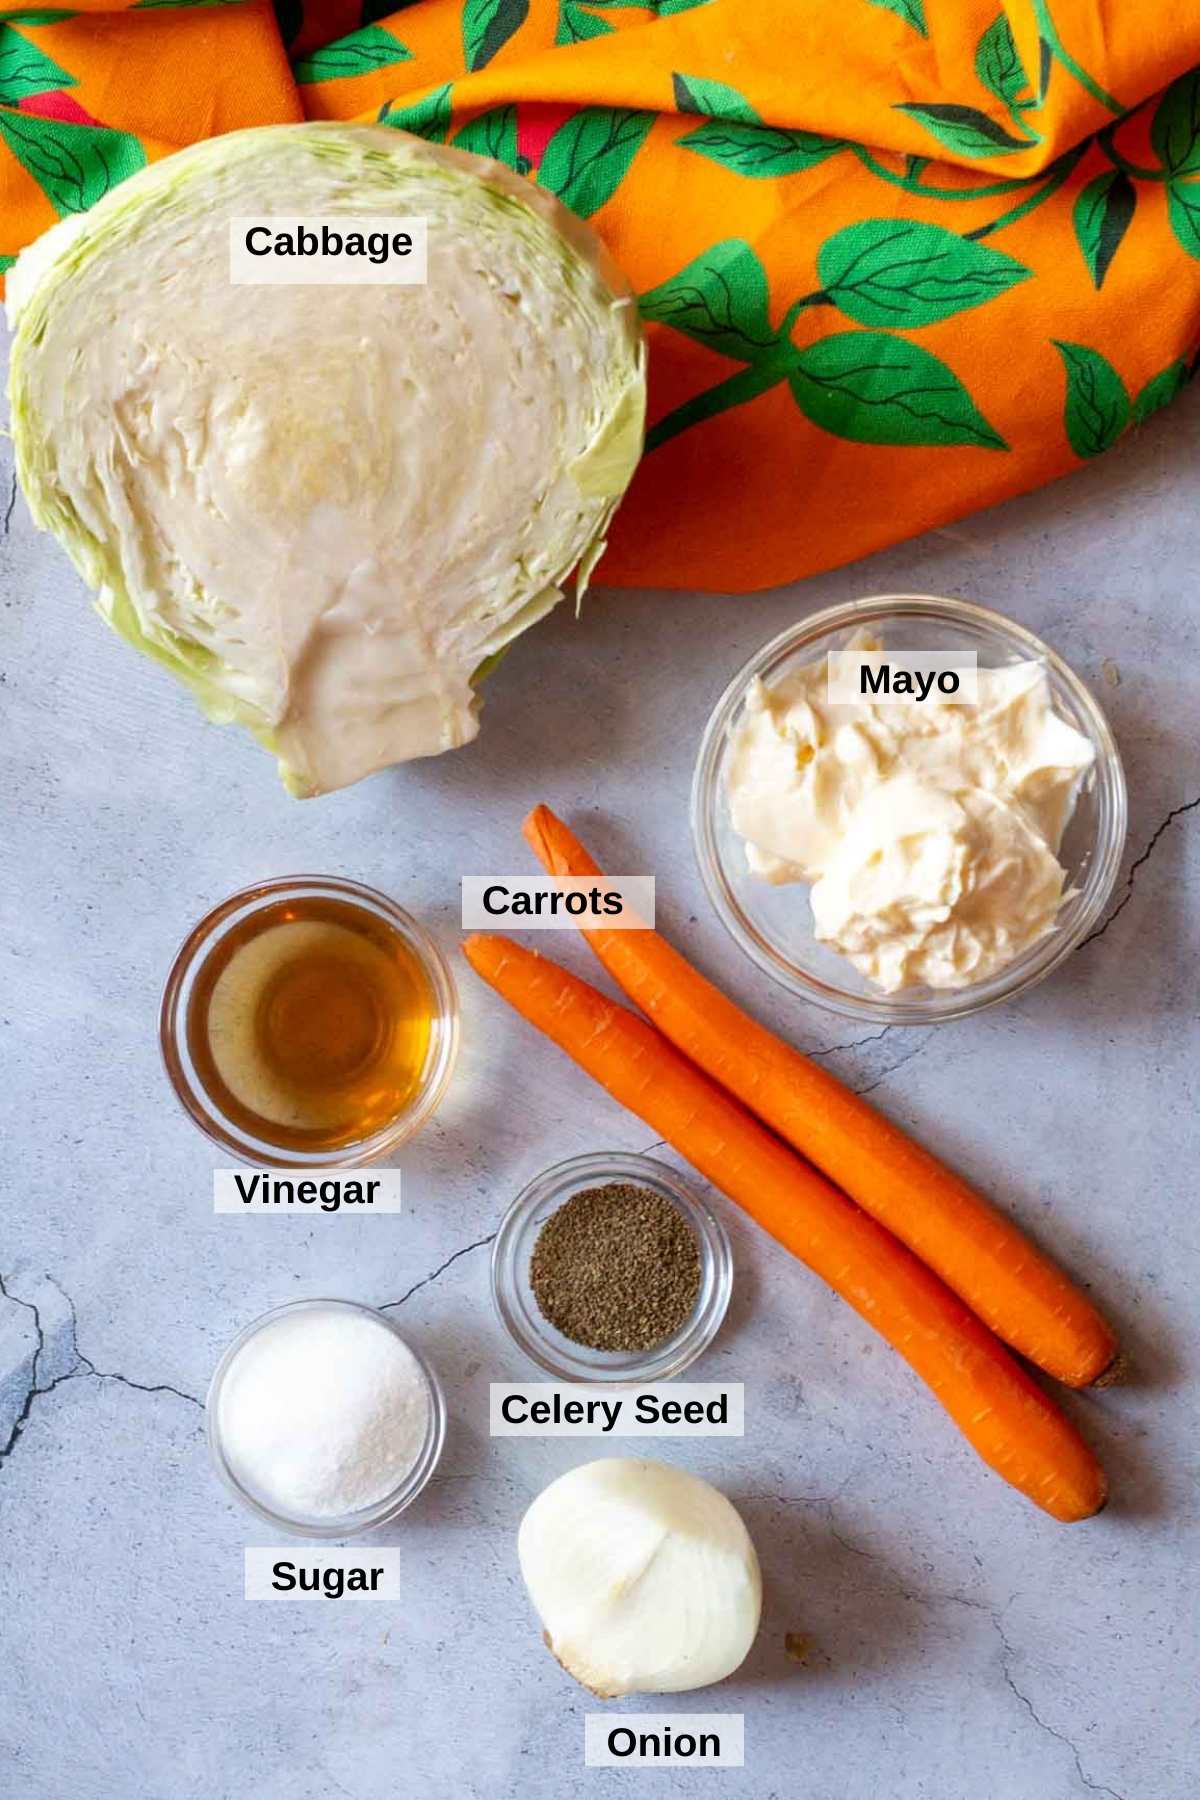 Ingredients to make Bobby Flay's Coleslaw Recipe